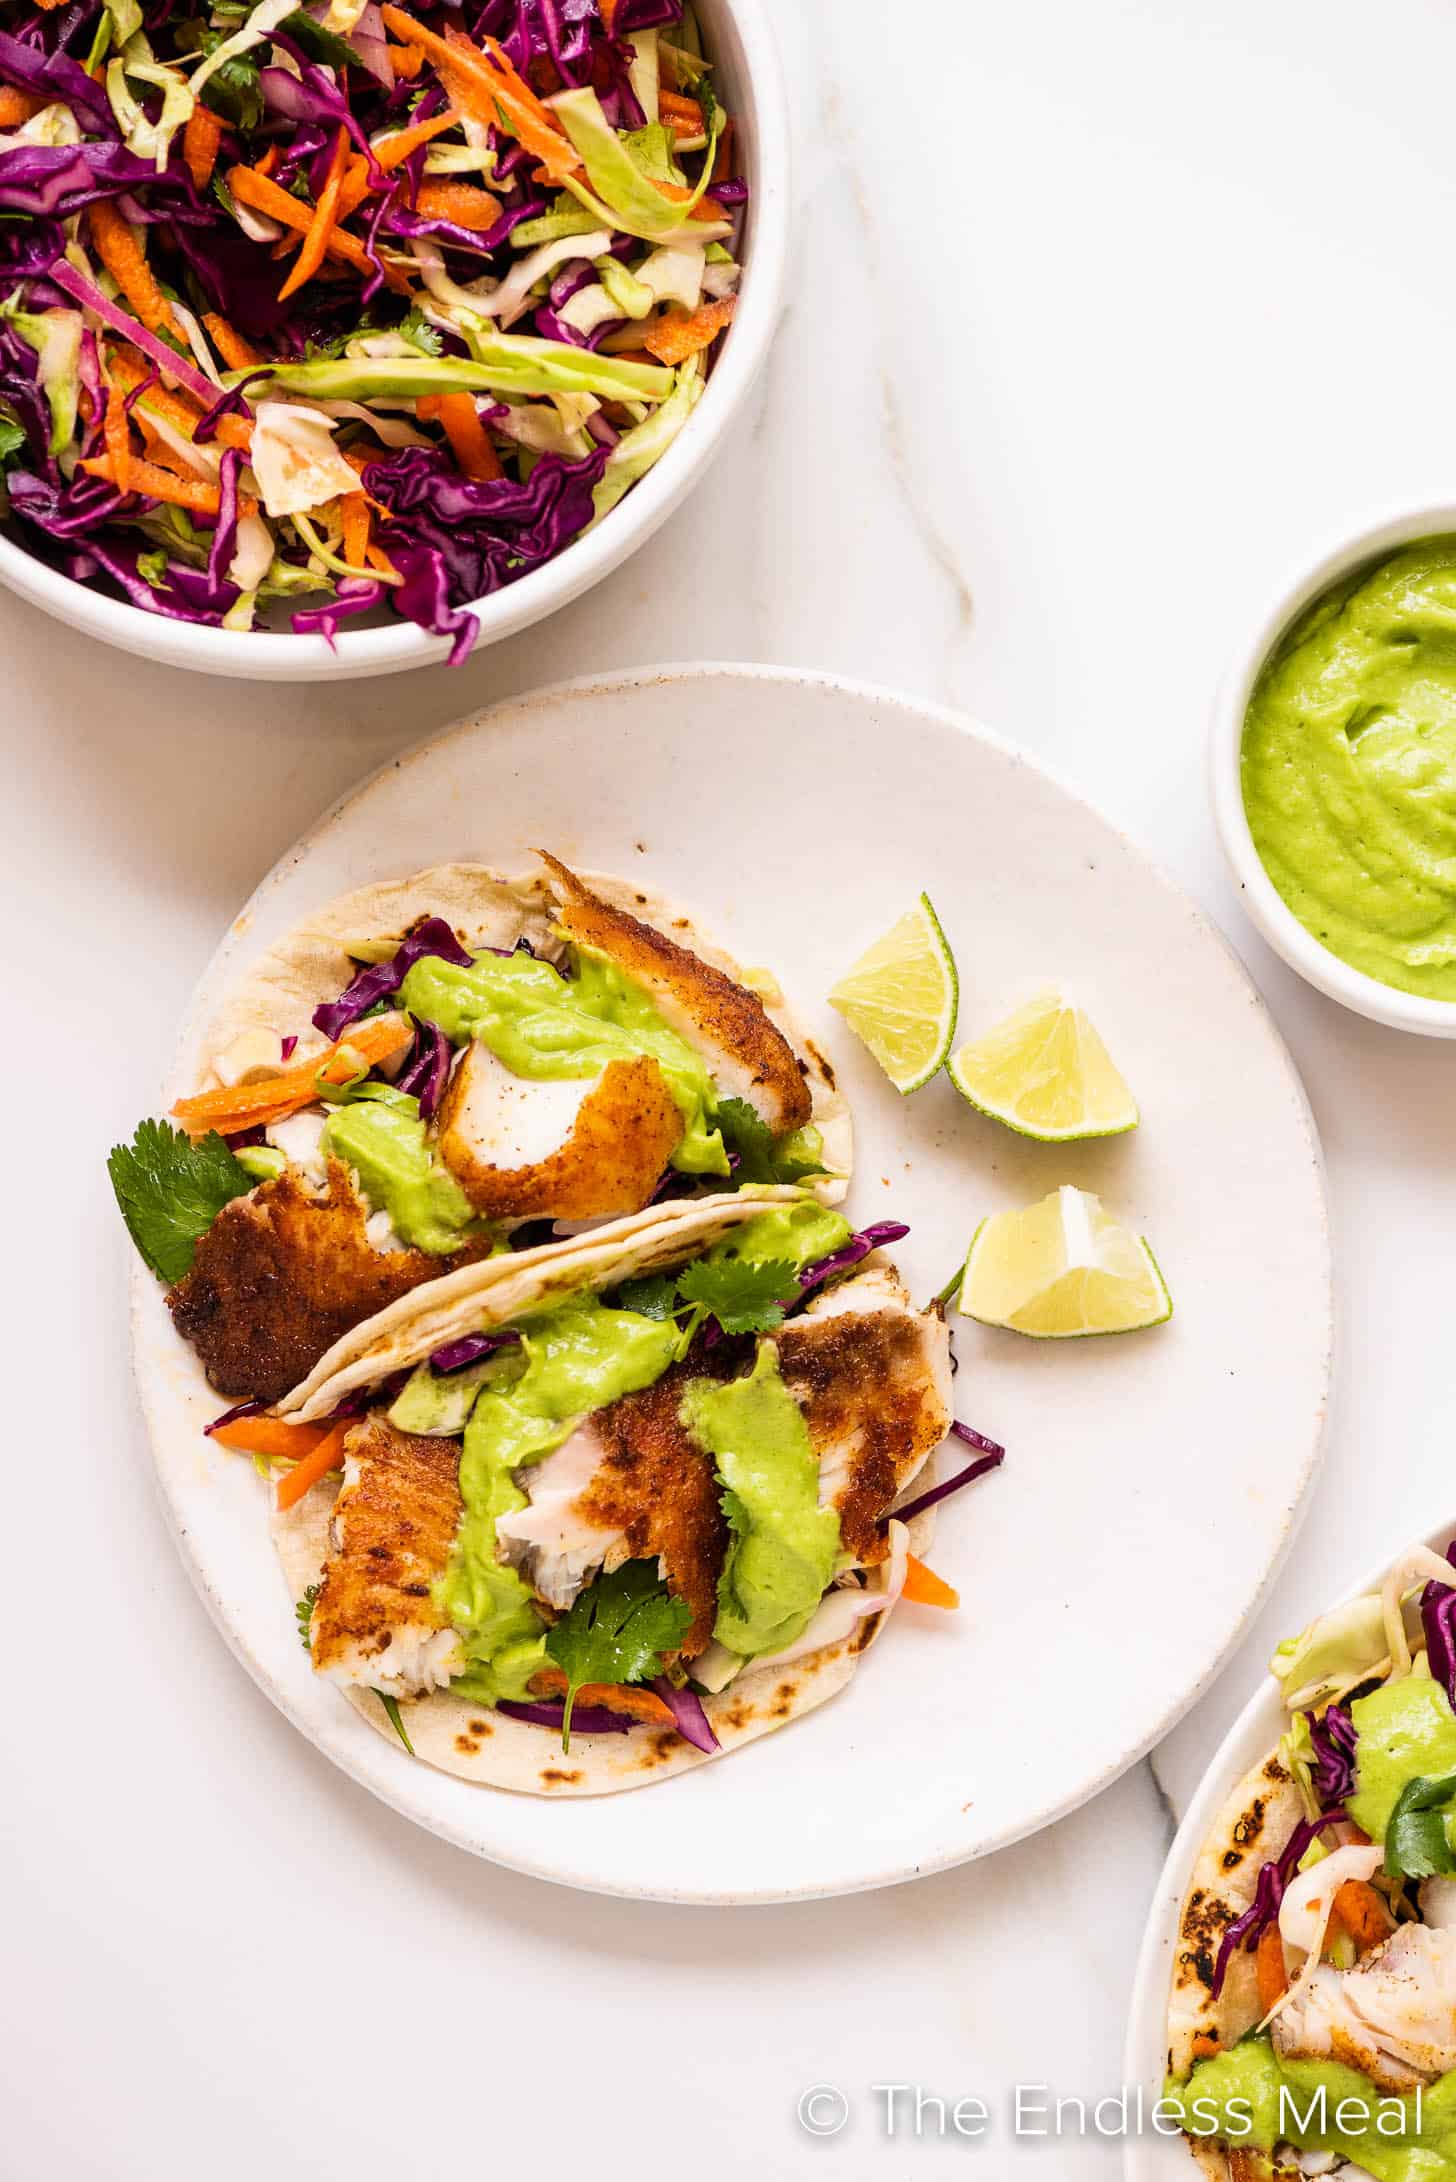 Baja Fish Tacos on a plate with avocado sauce and slaw on the side.